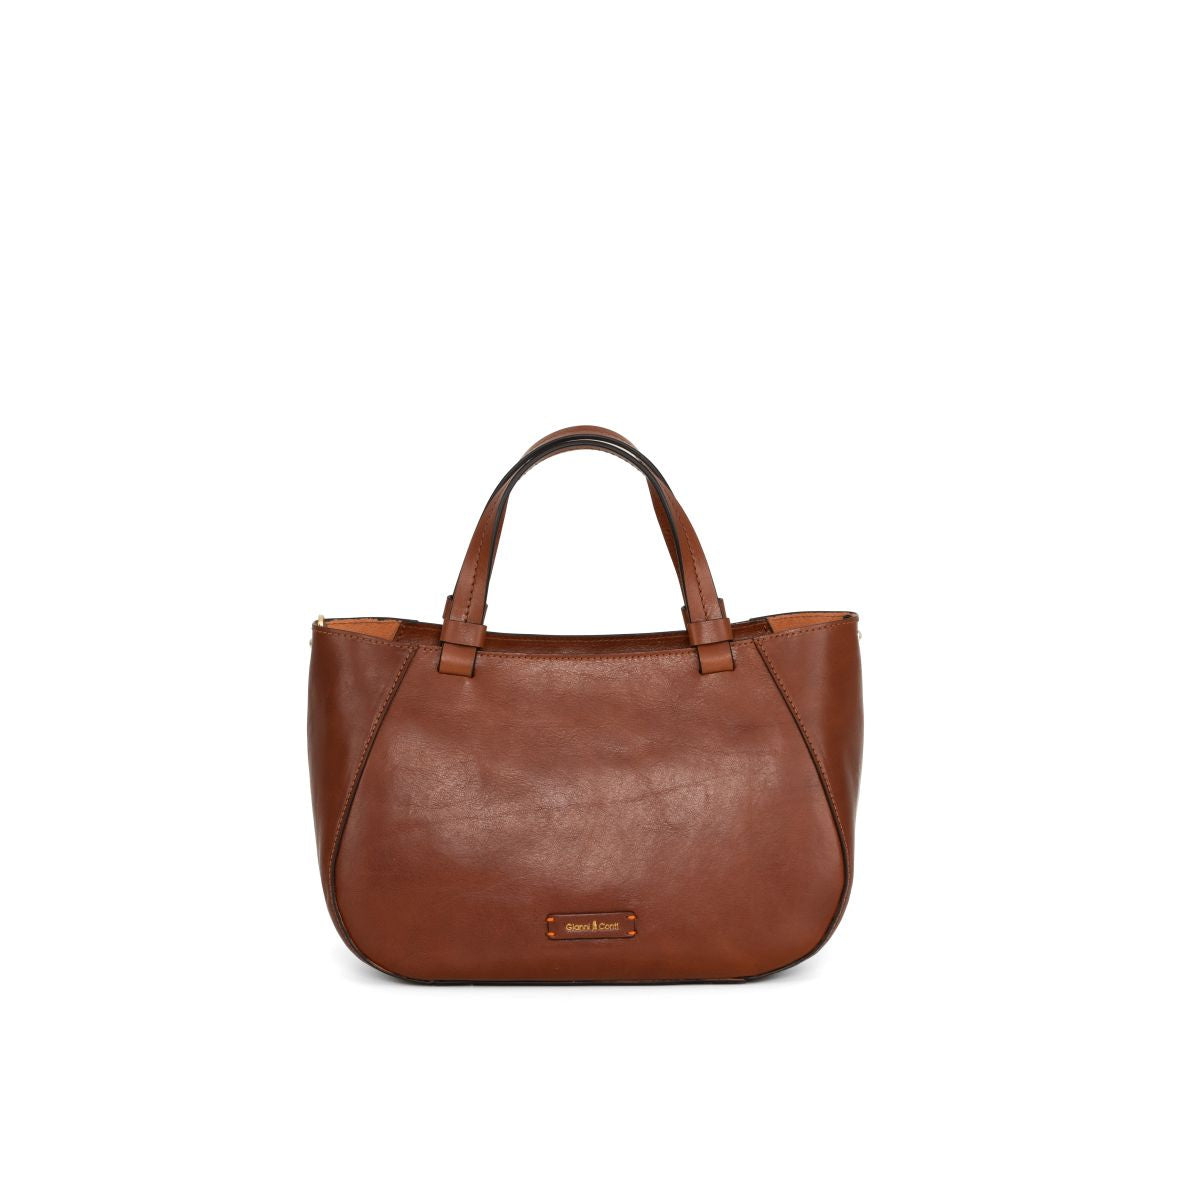 LINA by Gianni Conti - Italian Vegetable-Tanned Leather Top Handle Bag